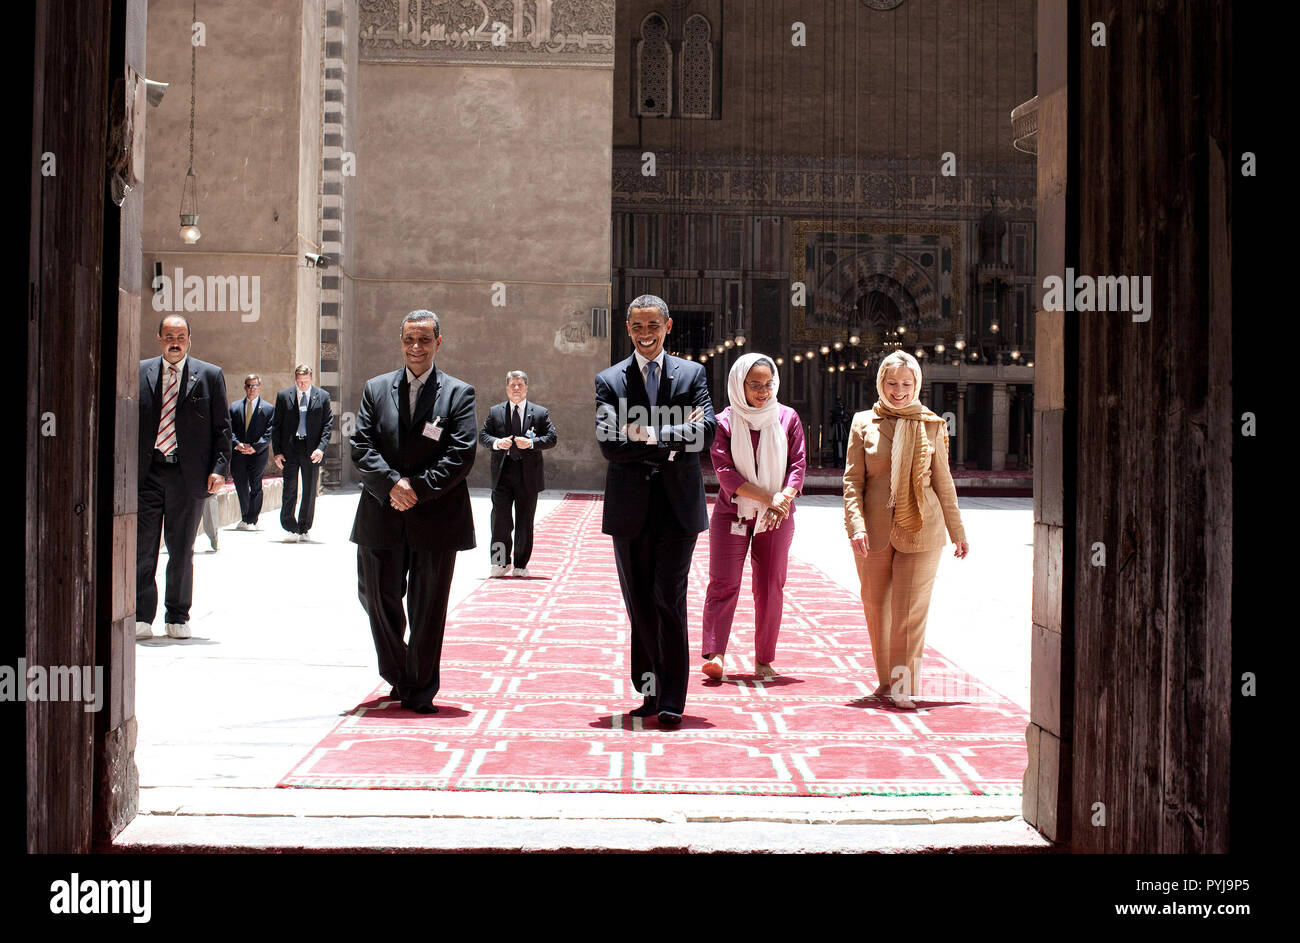 President Barack Obama tours the Sultan Hassan Mosque with Dr. Zahi Hawass (left), Iman Abdel Fateh (right), and Secretary of State Hillary Clinton in Cairo, Egypt, June 4, 2009. Stock Photo